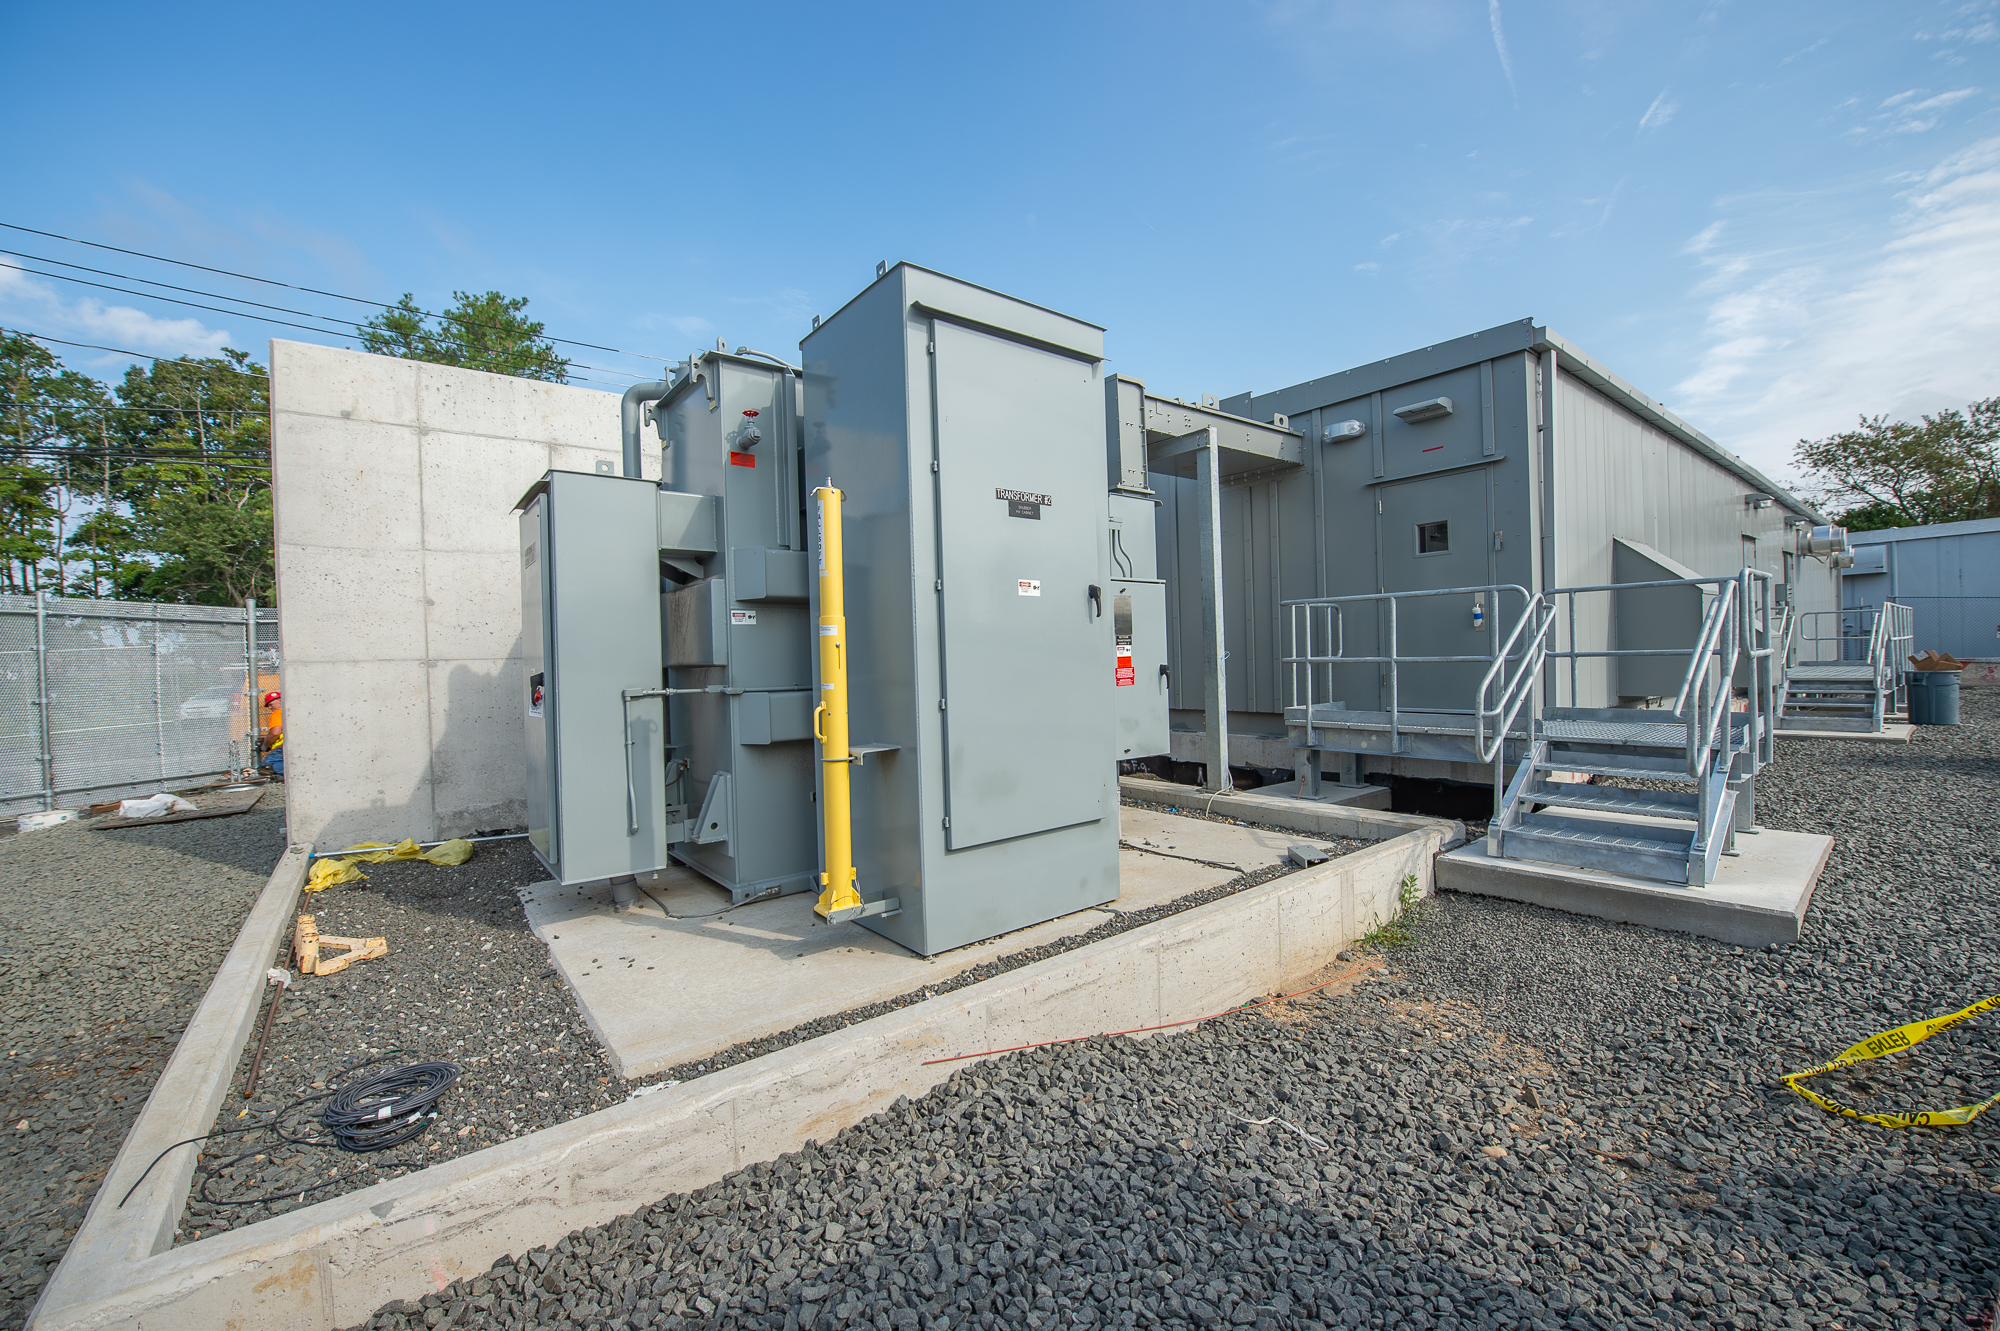 MTA Completes Replacement of LIRR New Cassel Substation